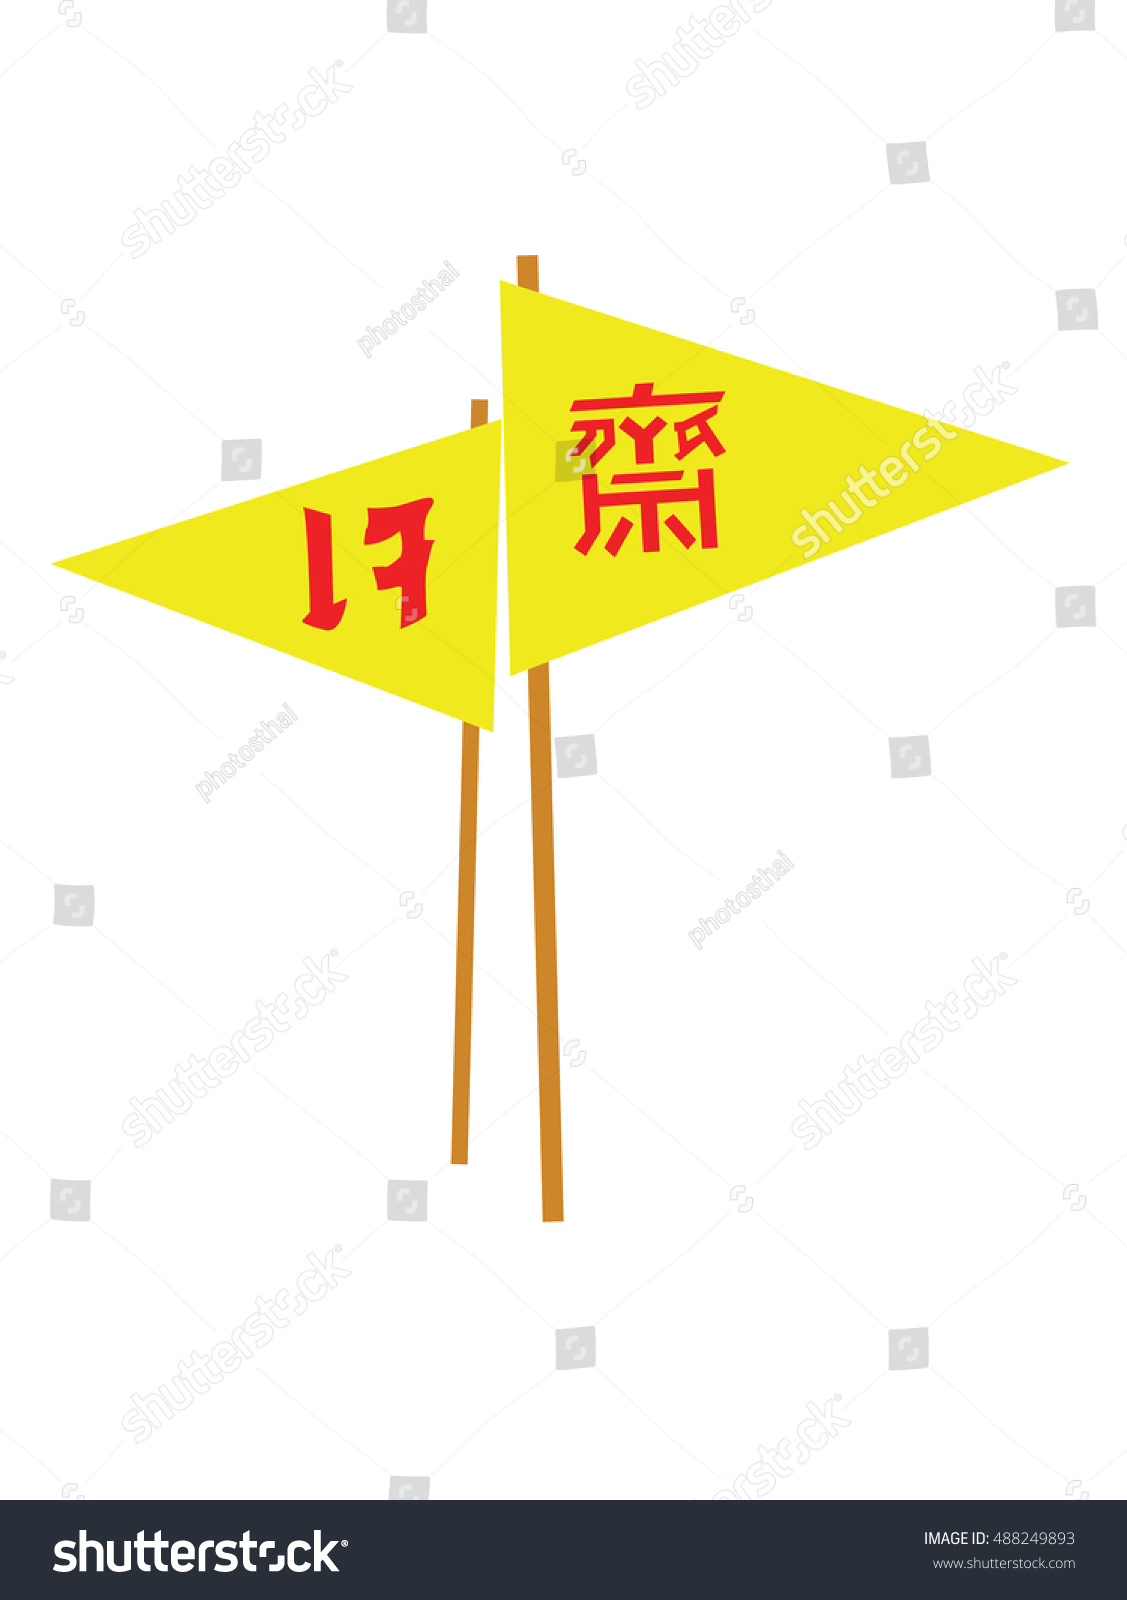 Thailand and Chinese text is "Je" symbol Flag of Chinese Vegetarian Festival illustration #488249893